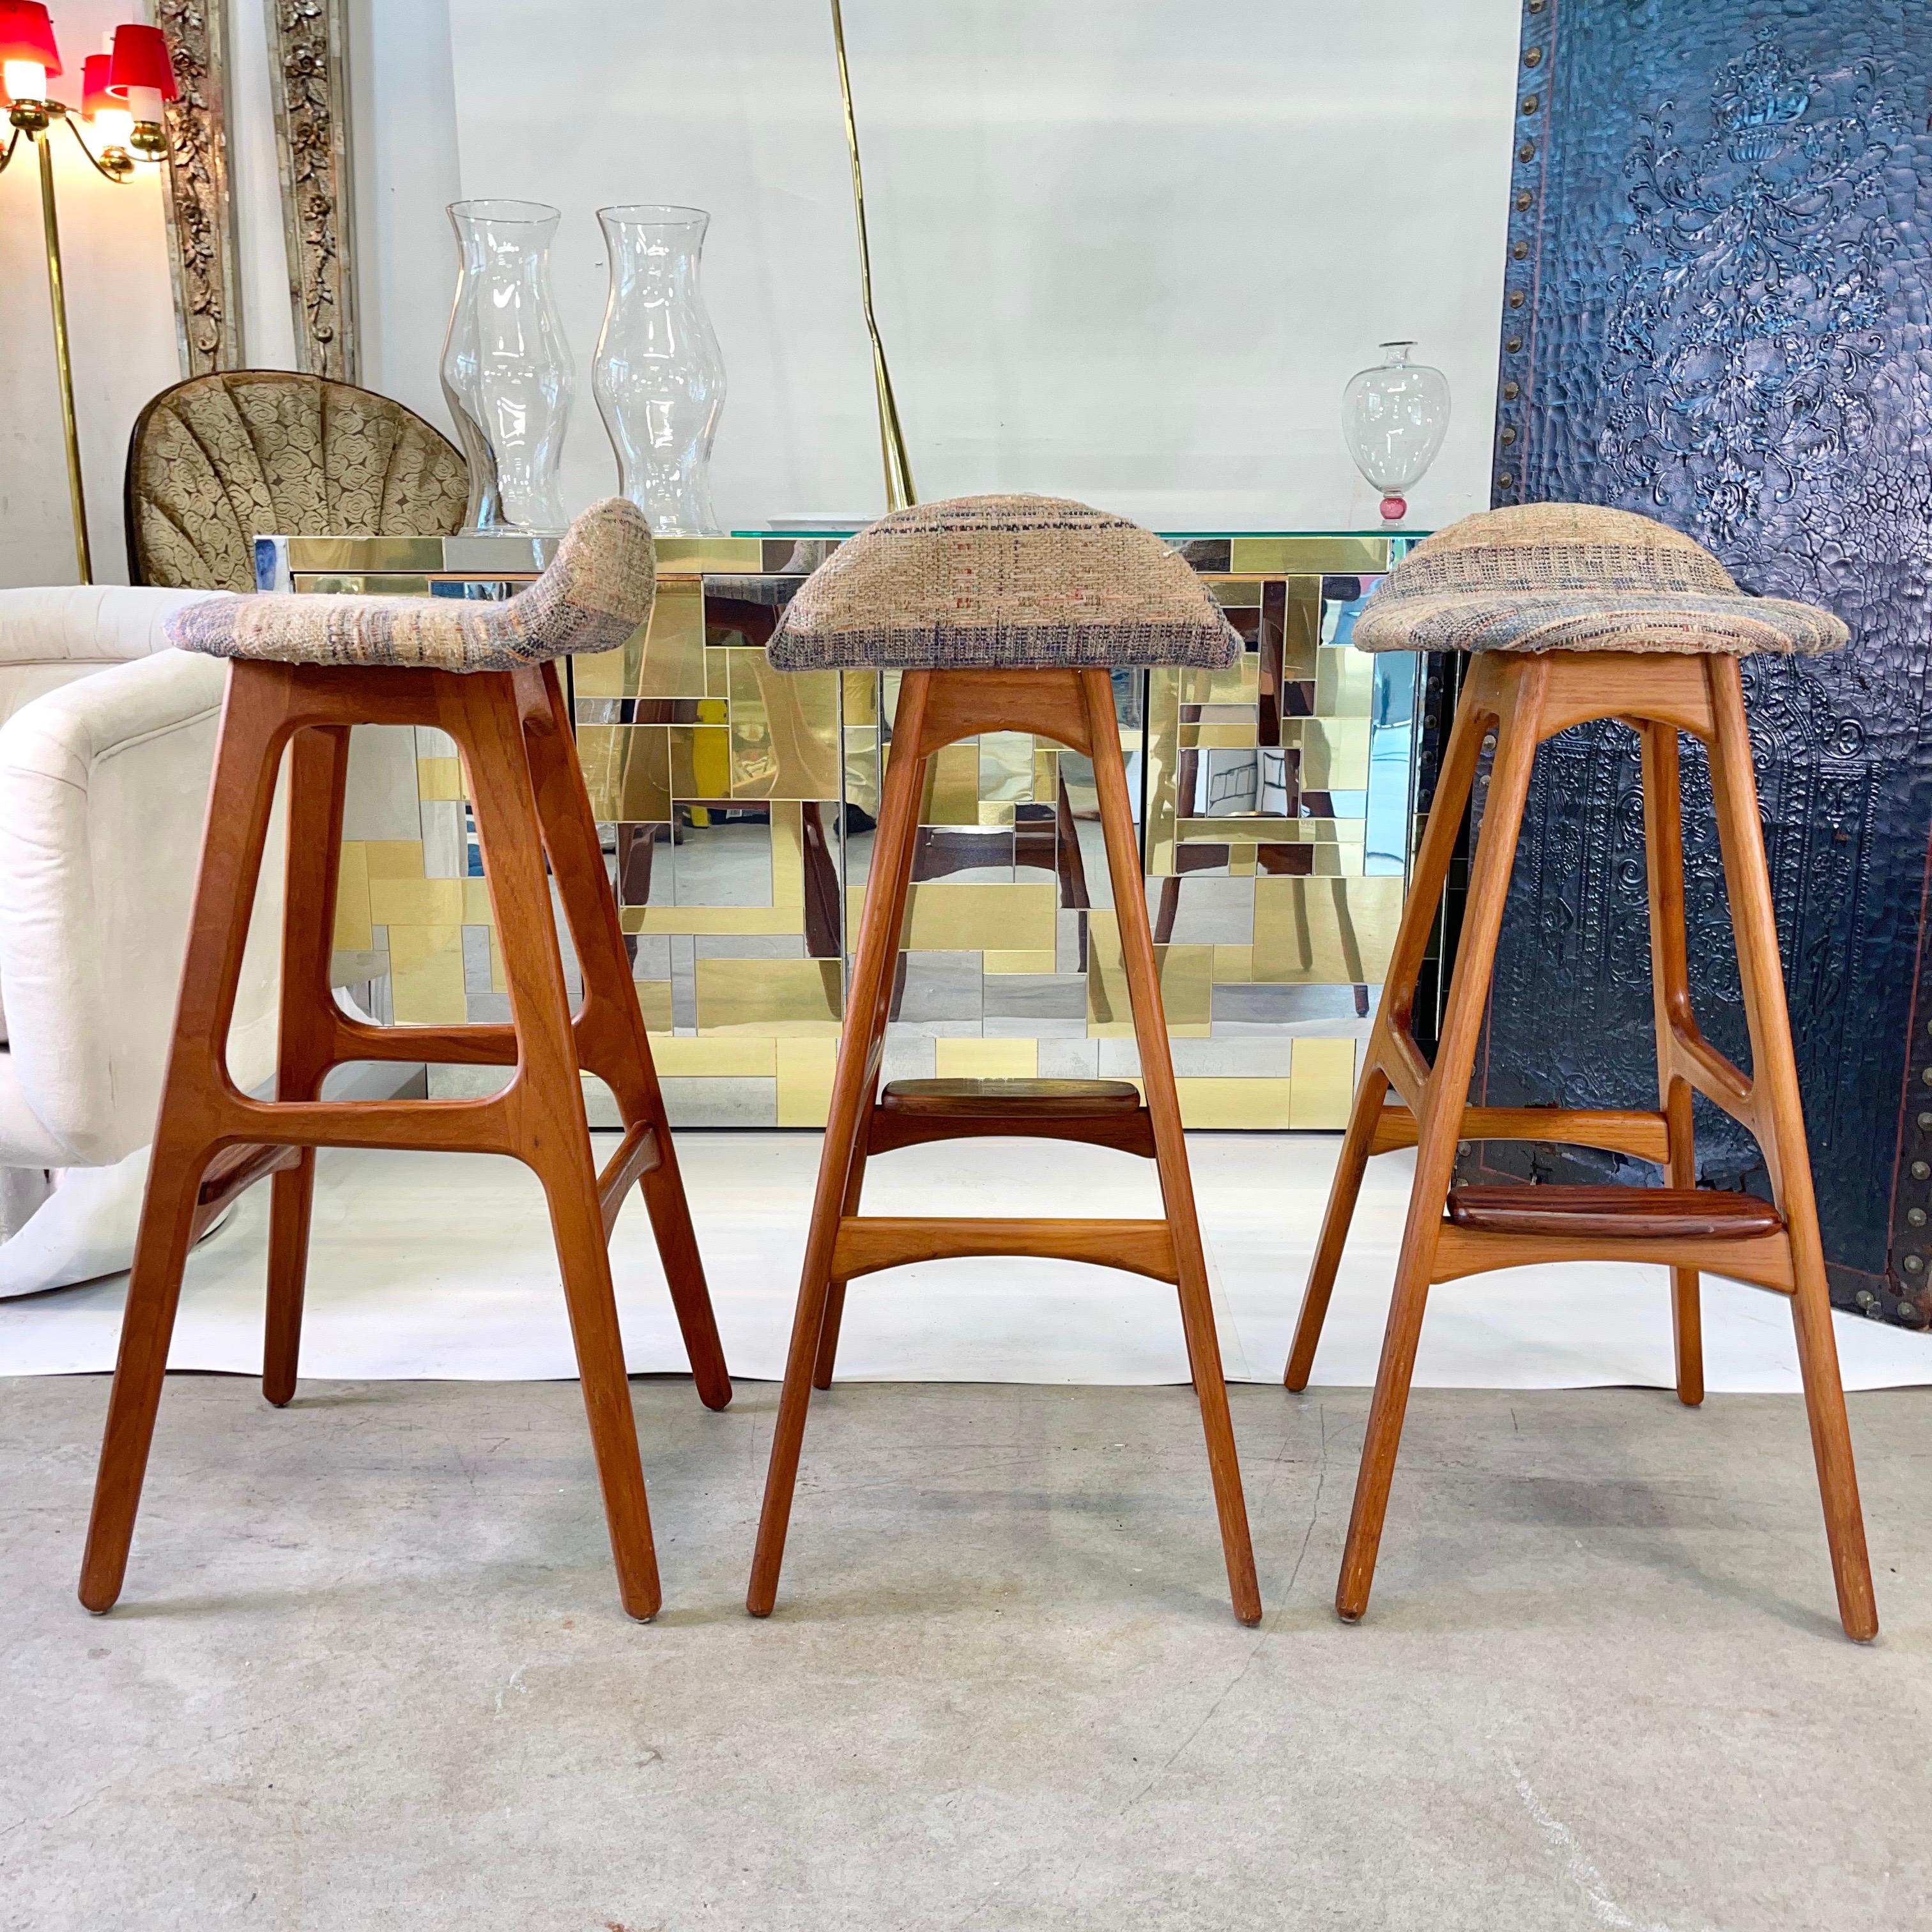 Original 1960s vintage O. D. 61 bar stools designed by Erik Buch (1923-1982) and made in Denmark by Oddense Maskinsnedkeri A-S.
Teak frame with a rosewood foot rest.
Woven textile upholstered seats in clean condition.
If requested we can have